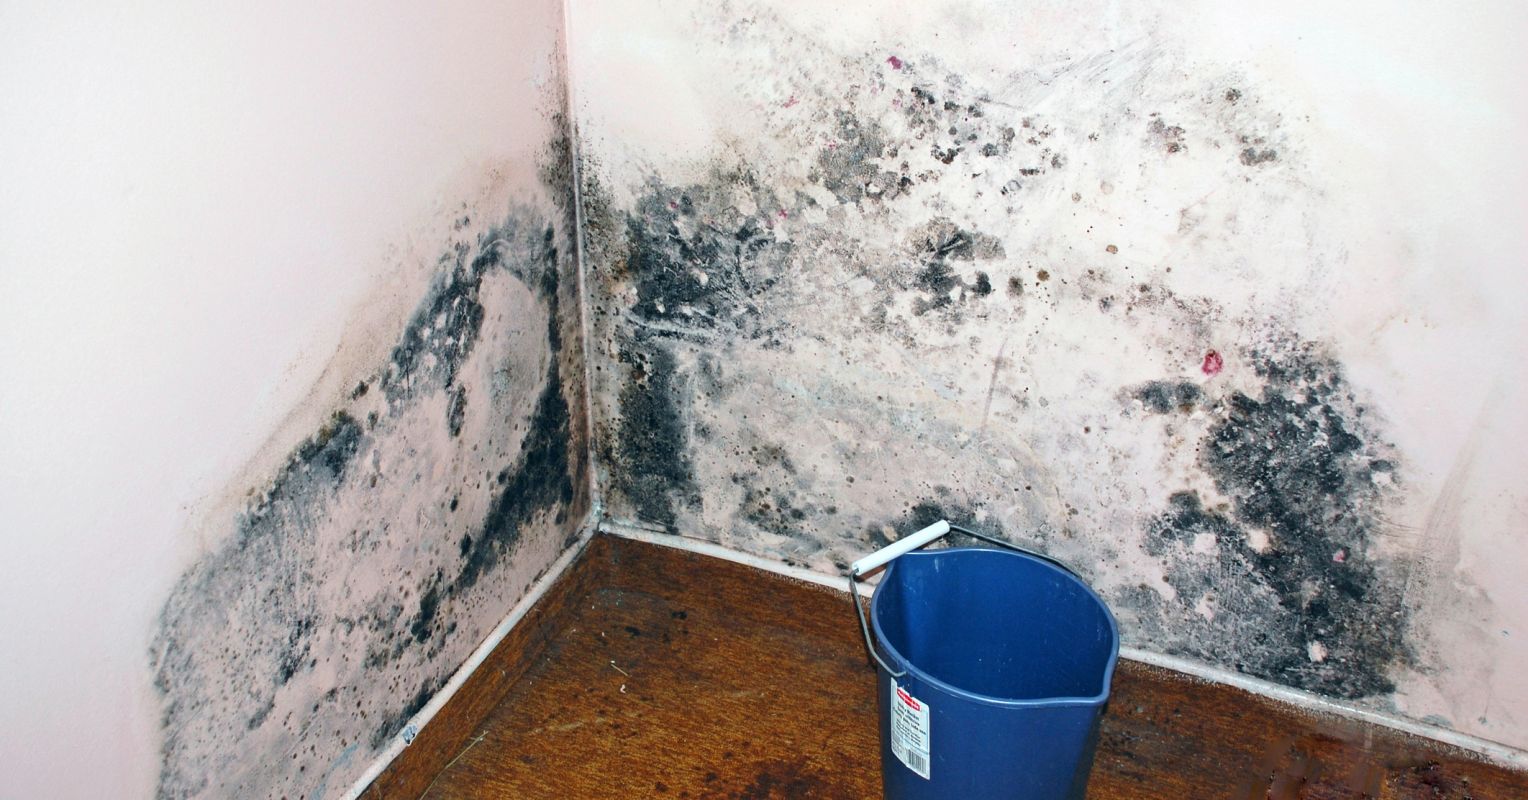 Image depicting mold growth on a damp surface, representing the theme of mold toxicity.